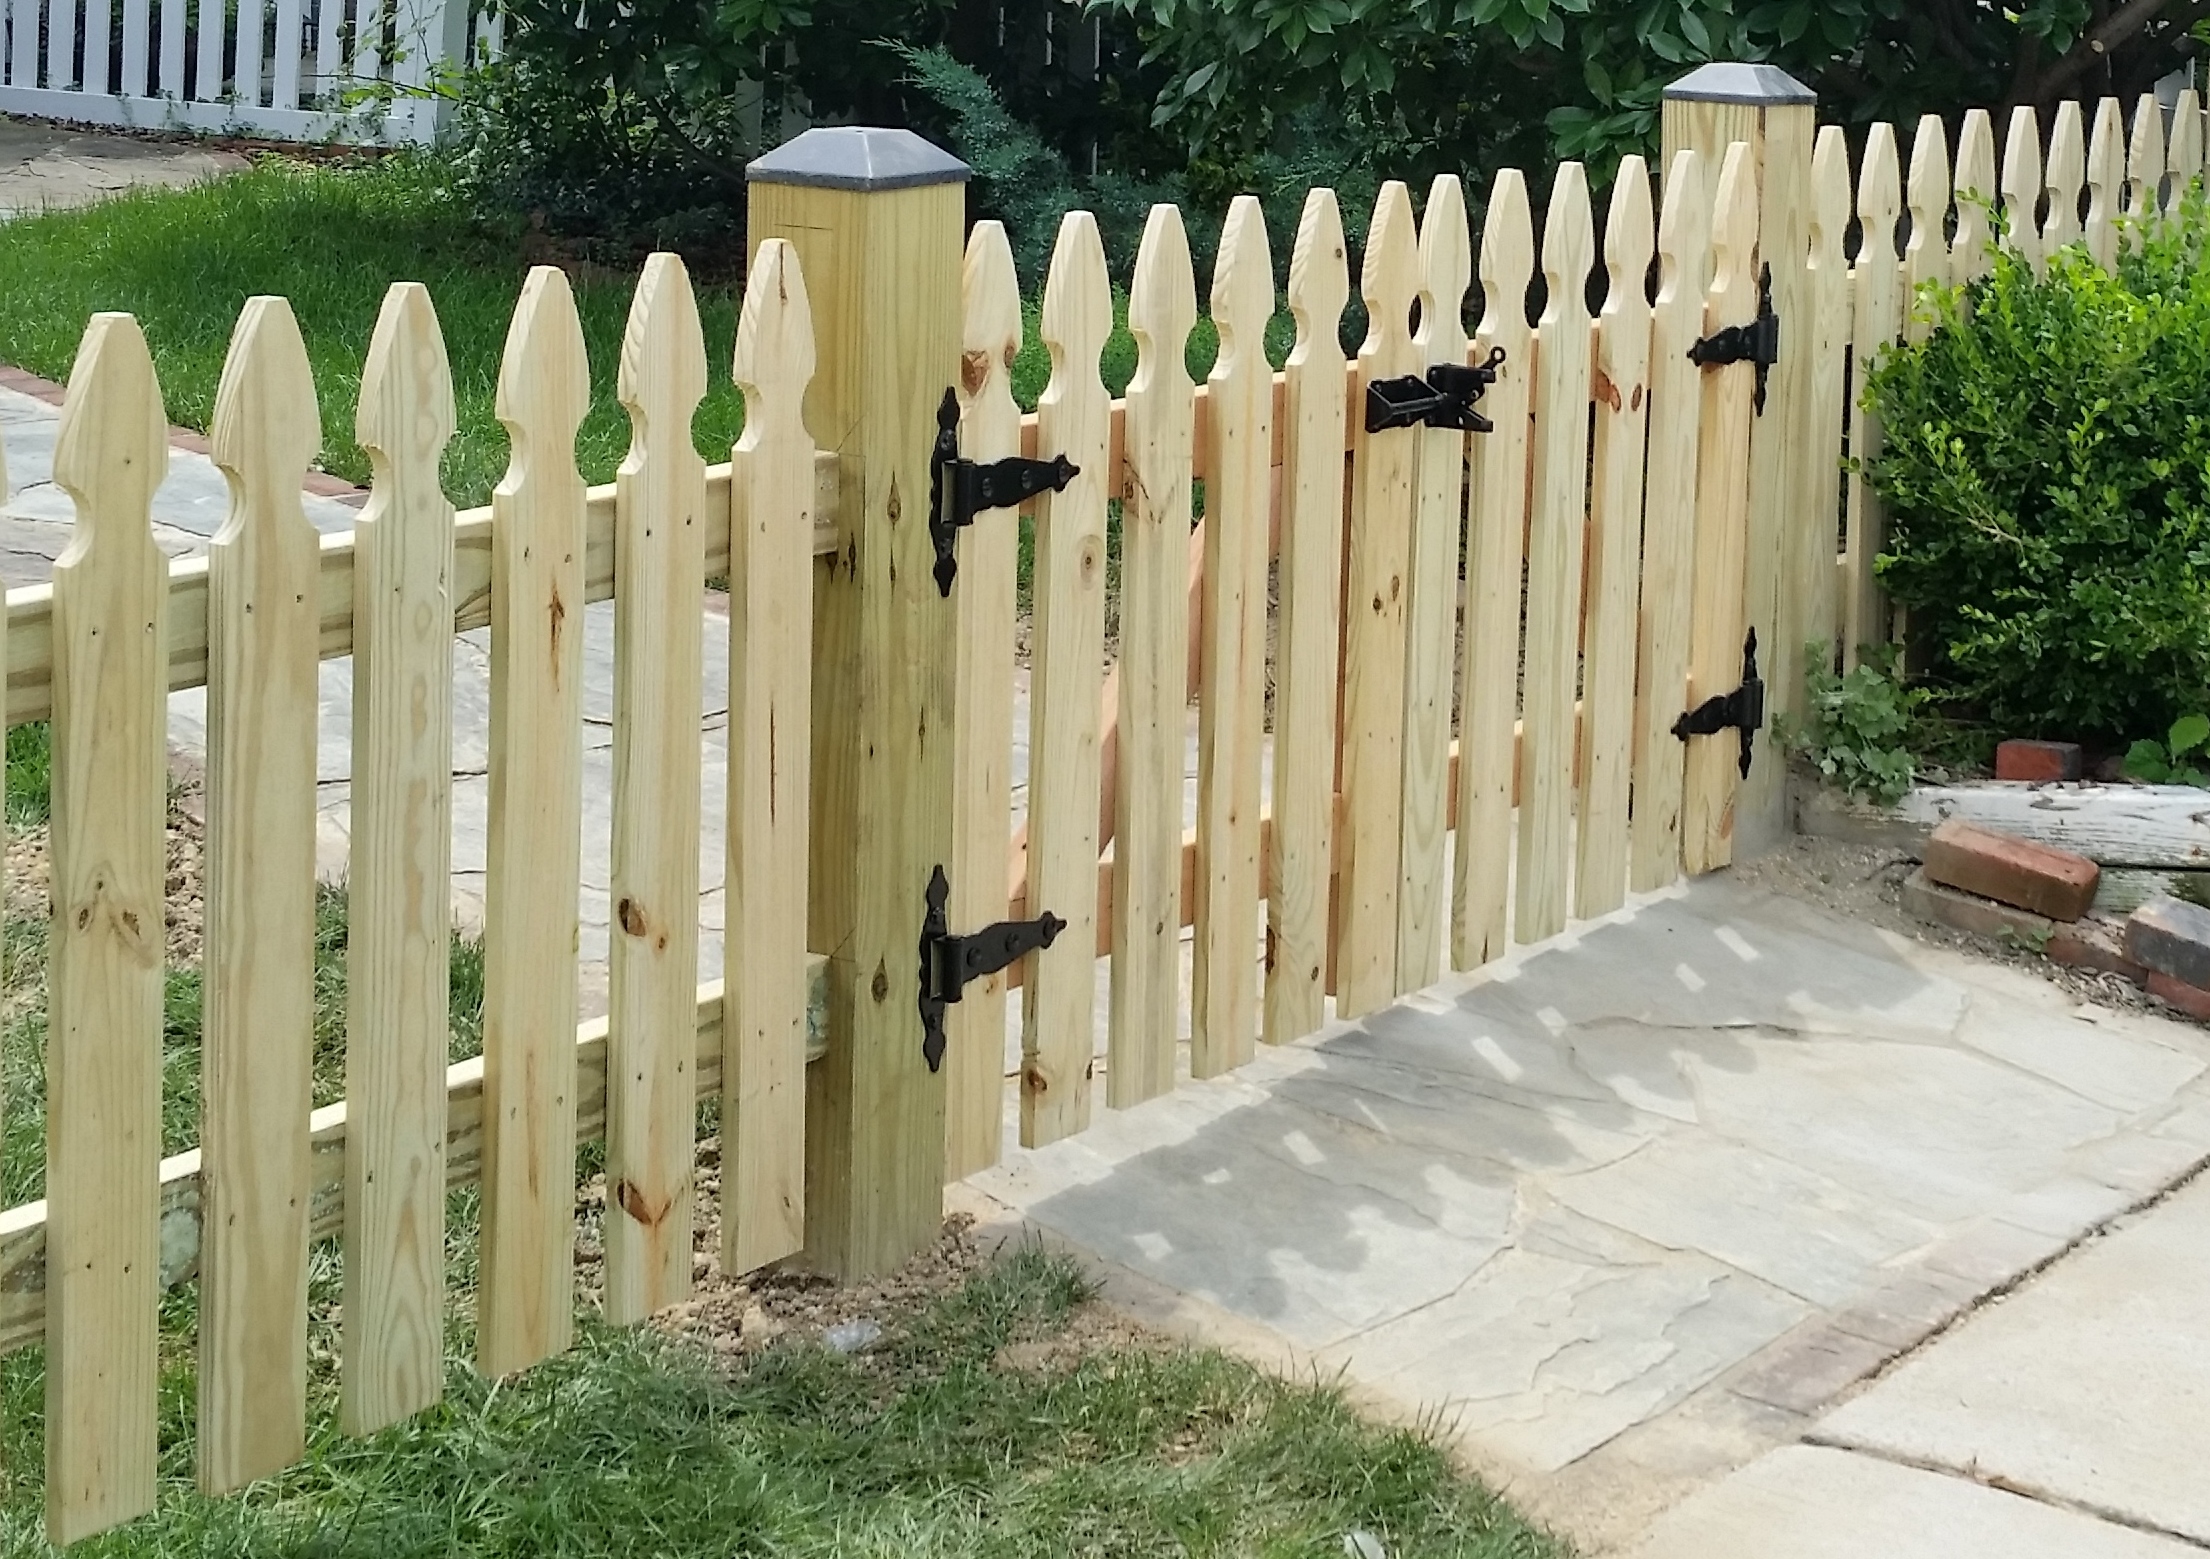 Pressure Treated Wood with Black Vinyl Post Caps and Double Gate